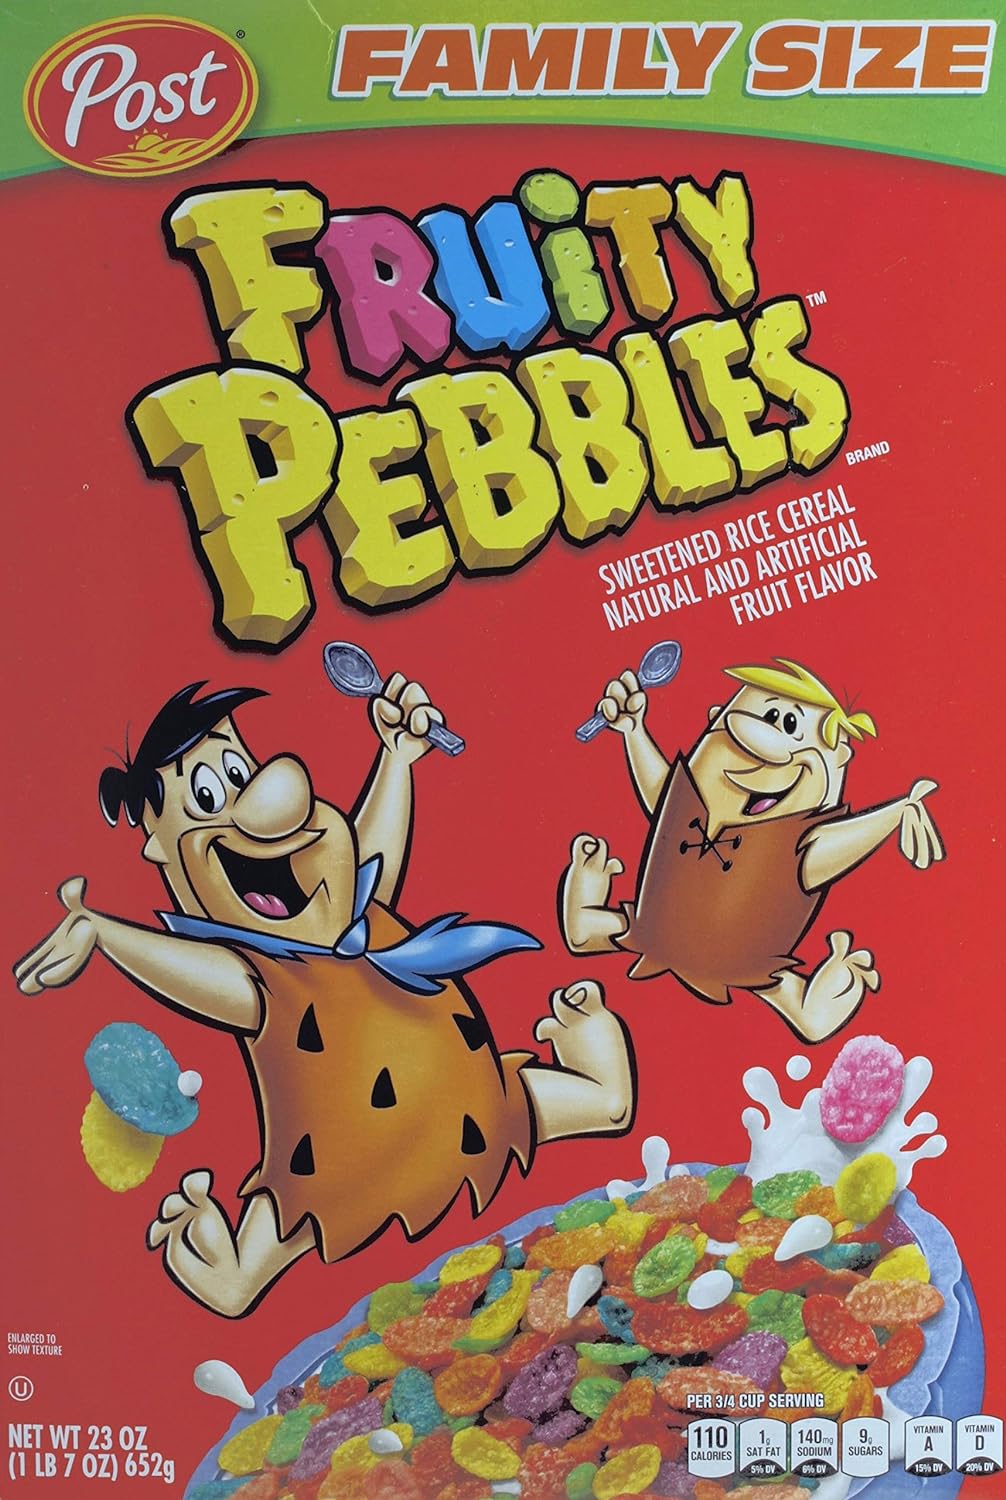 Post Fruity Pebbles Gluten Free Cereal, 23 Ounce